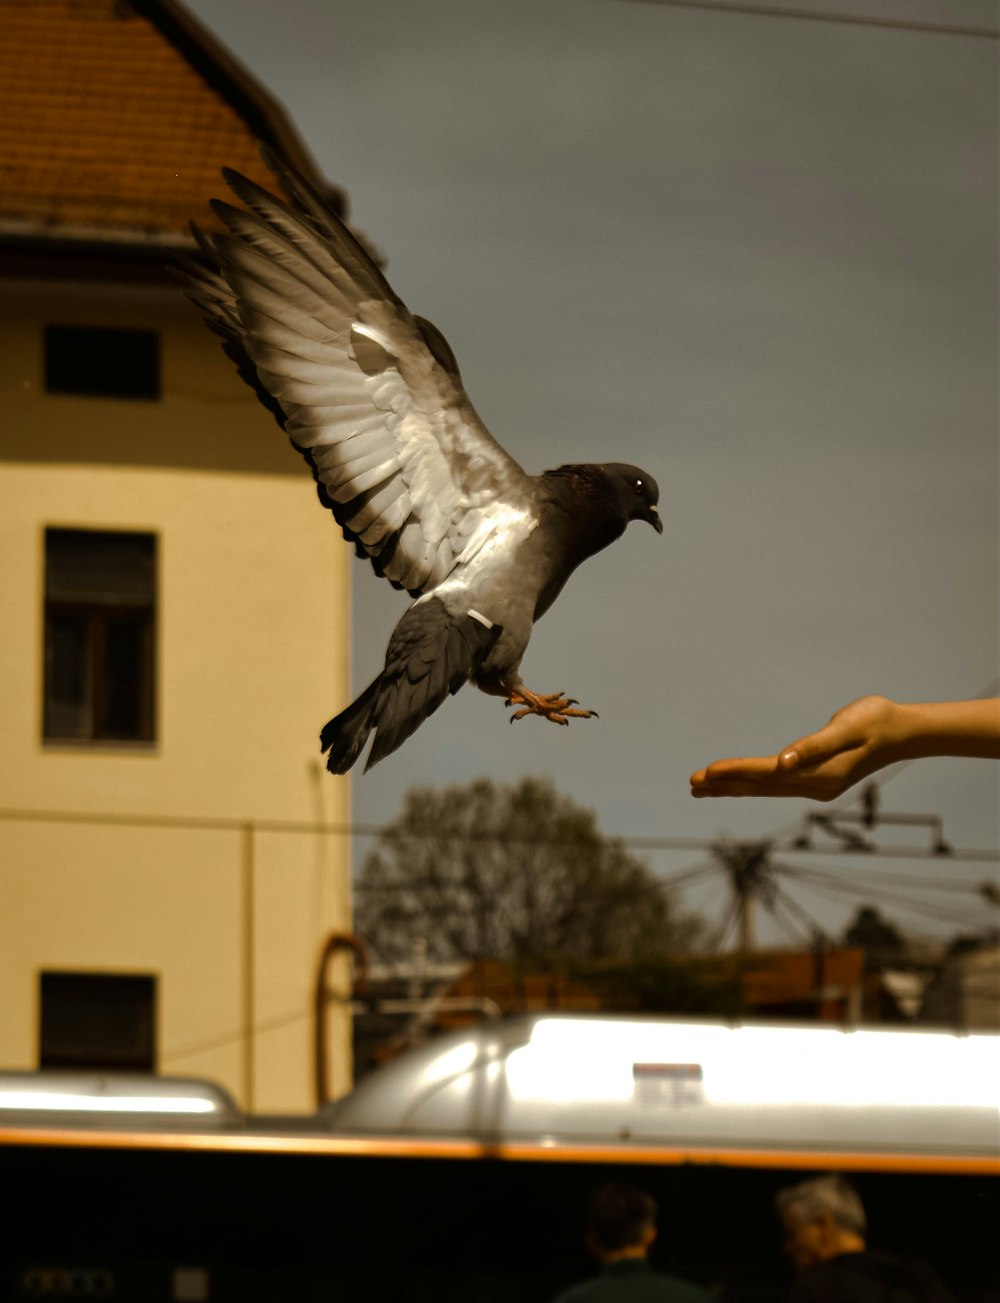 a bird flying over a person's hand with a building in the background